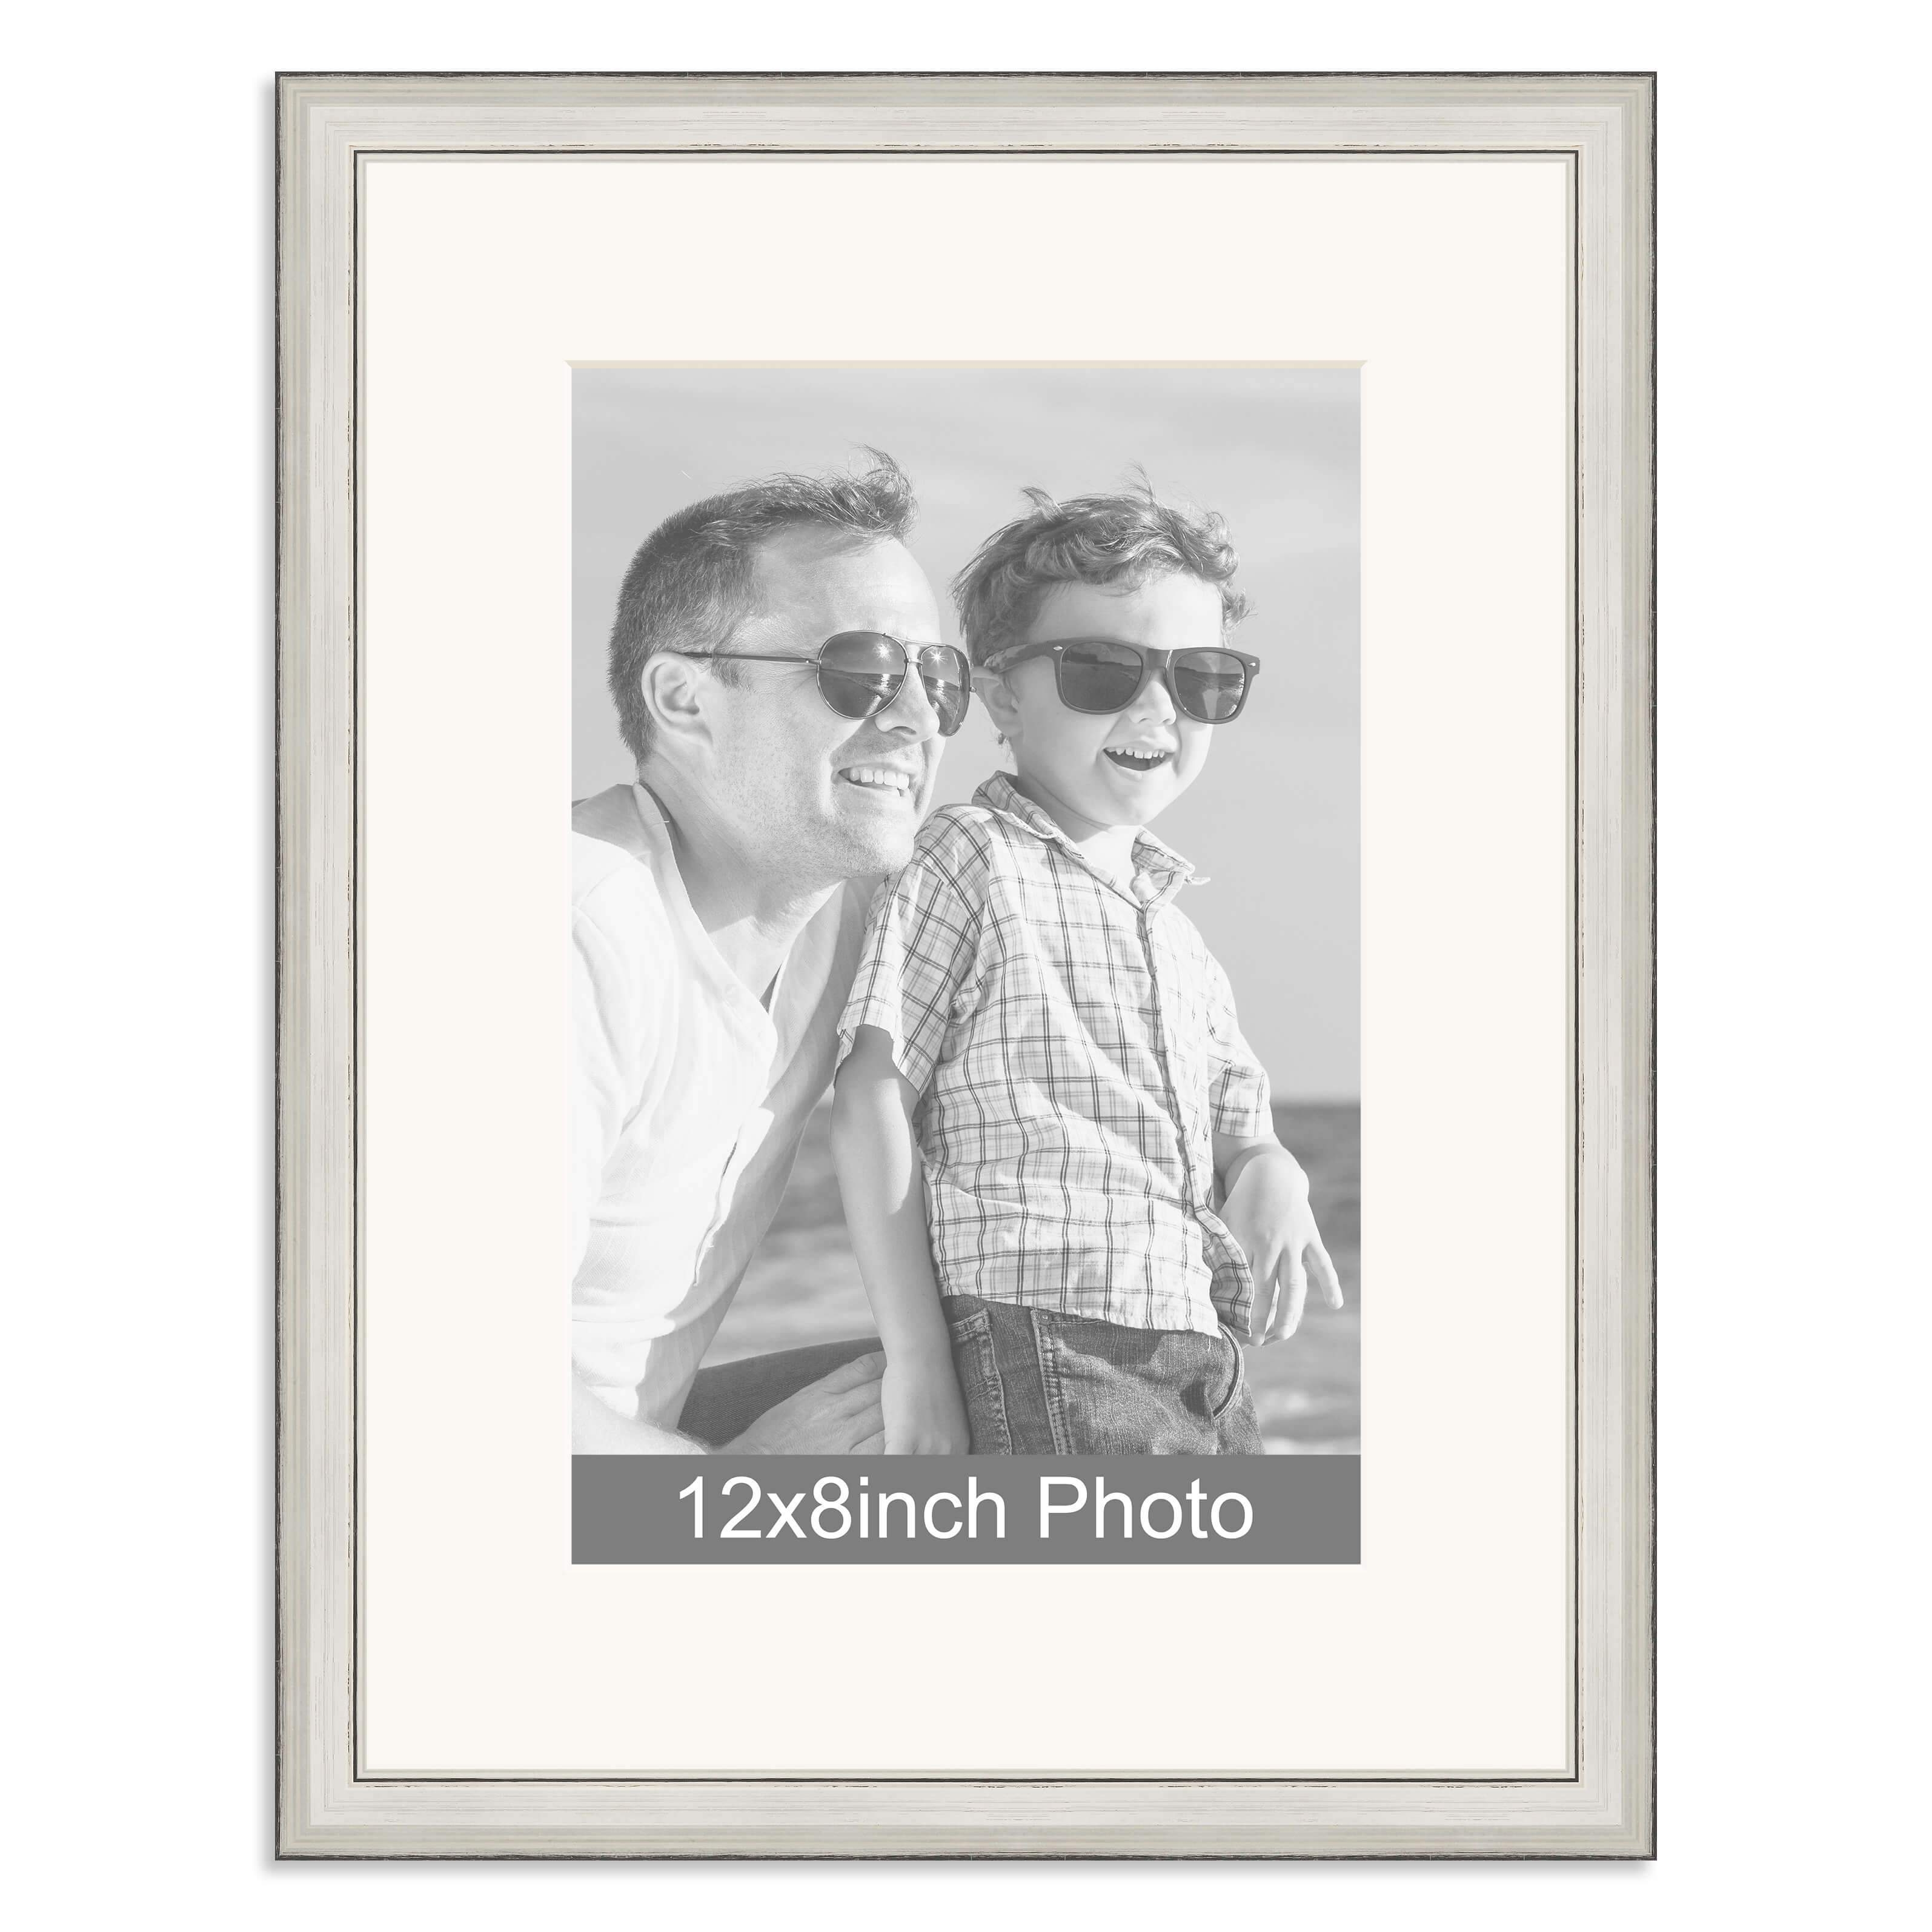 Silver Wooden Photo Frame for a 12×8/8x12in Photo